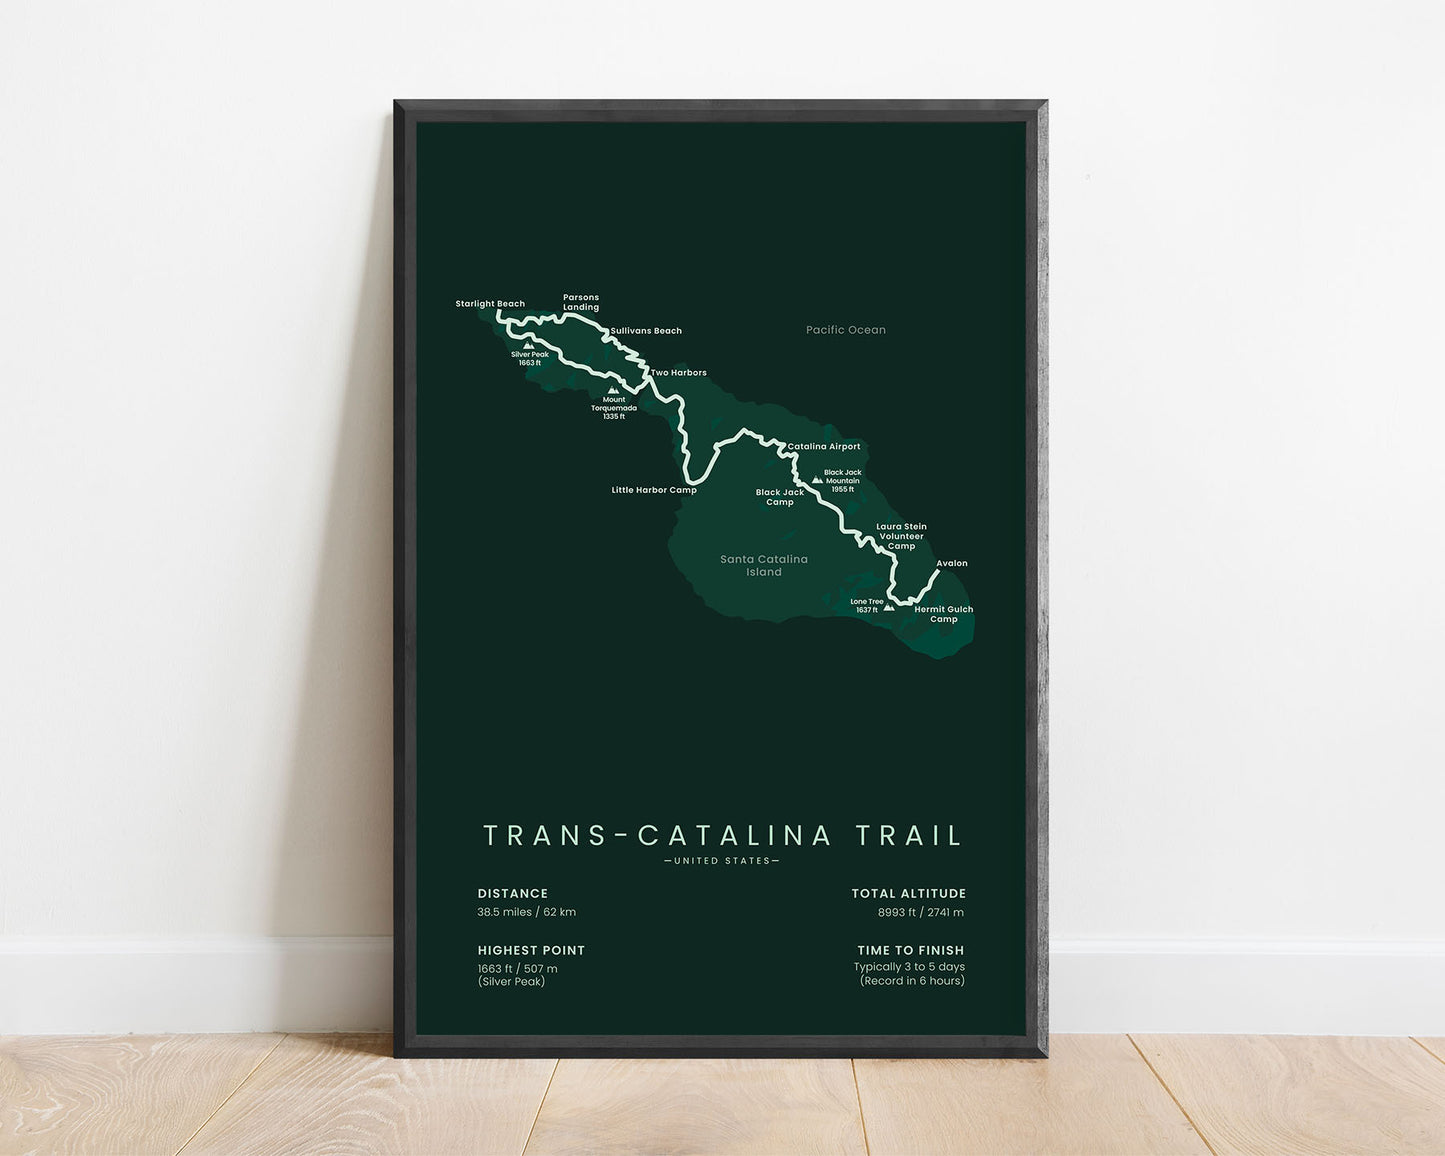 Trans-Catalina Trail (United States) path print with green background